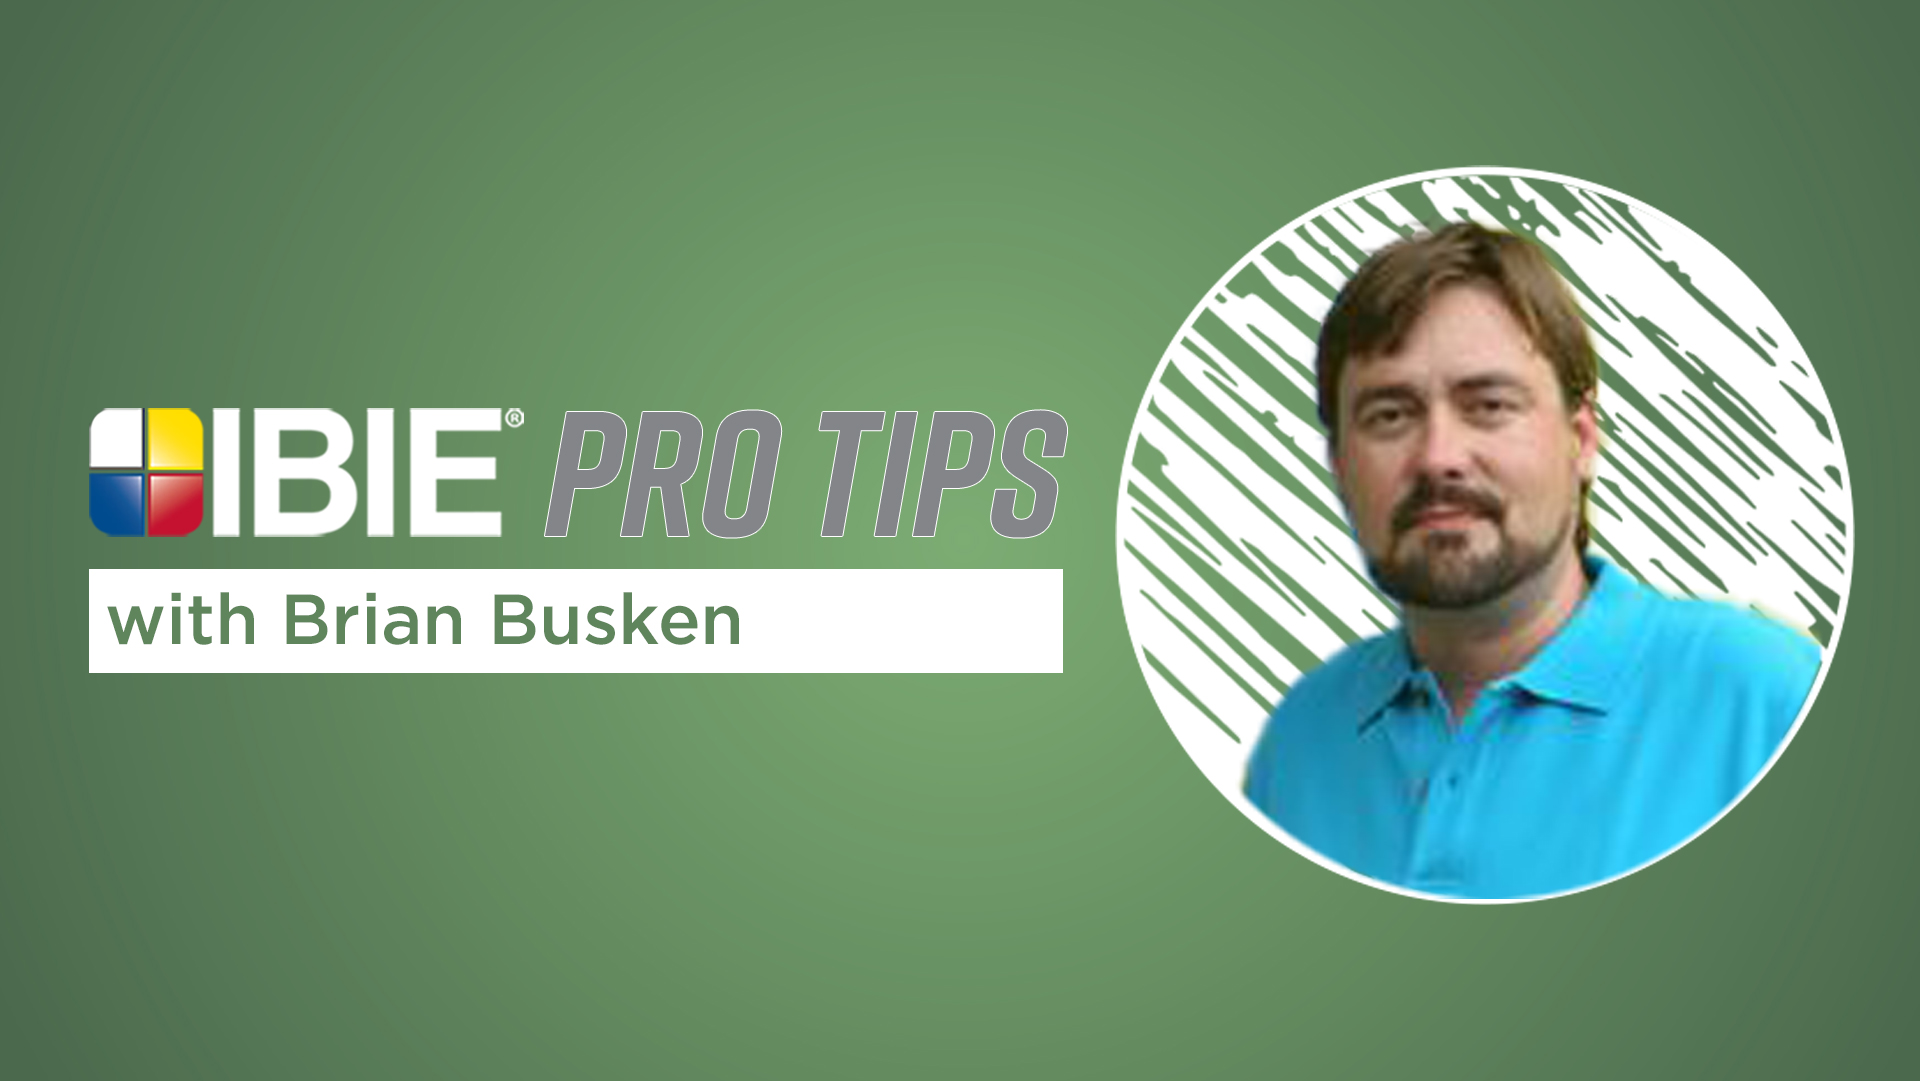 Pro tips cover brian busken